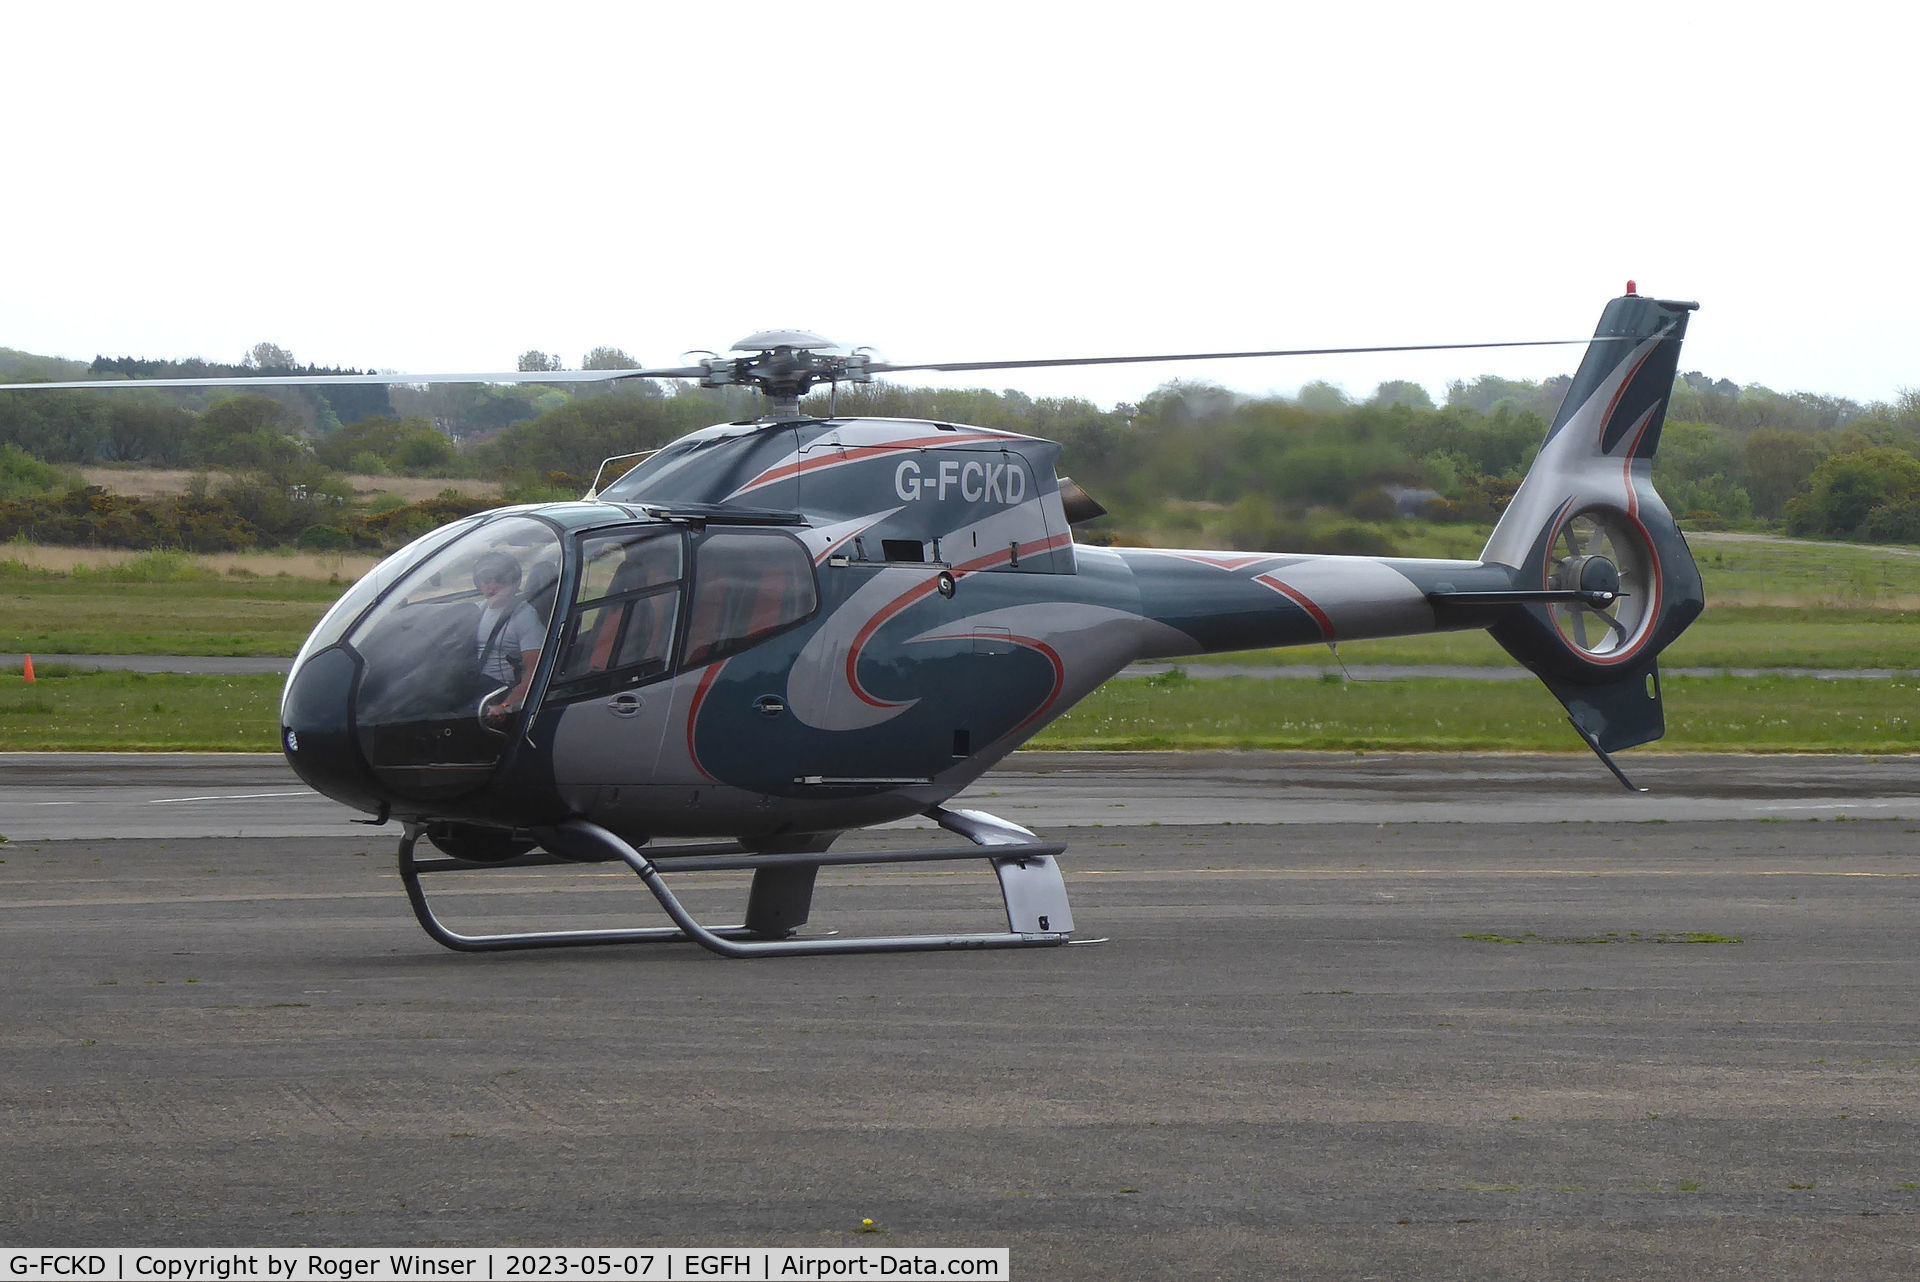 G-FCKD, 2001 Eurocopter EC-120B Colibri C/N 1209, Visiting Colibri helicopter operated by Red Dragon Management.